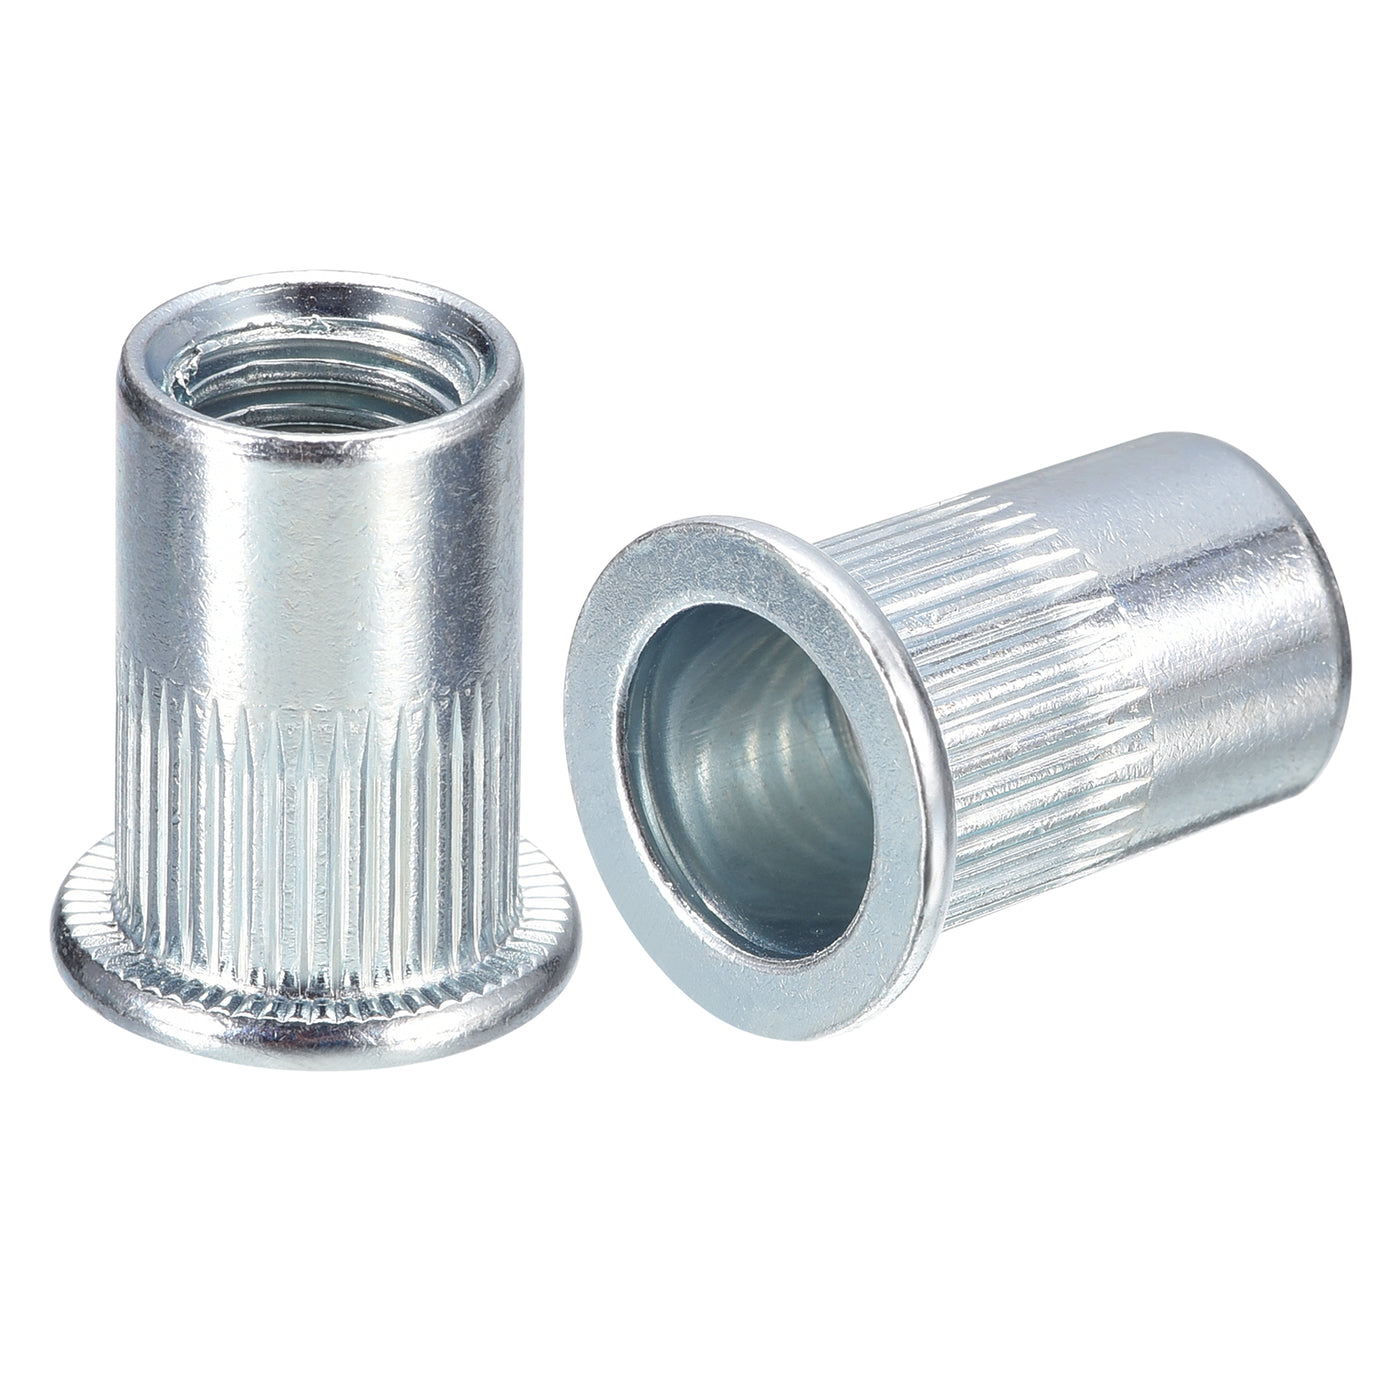 uxcell Uxcell Rivet Nuts, Zinc Plated Carbon Steel Knurled Flat Head Threaded Insert Nuts for Metal, Plastic